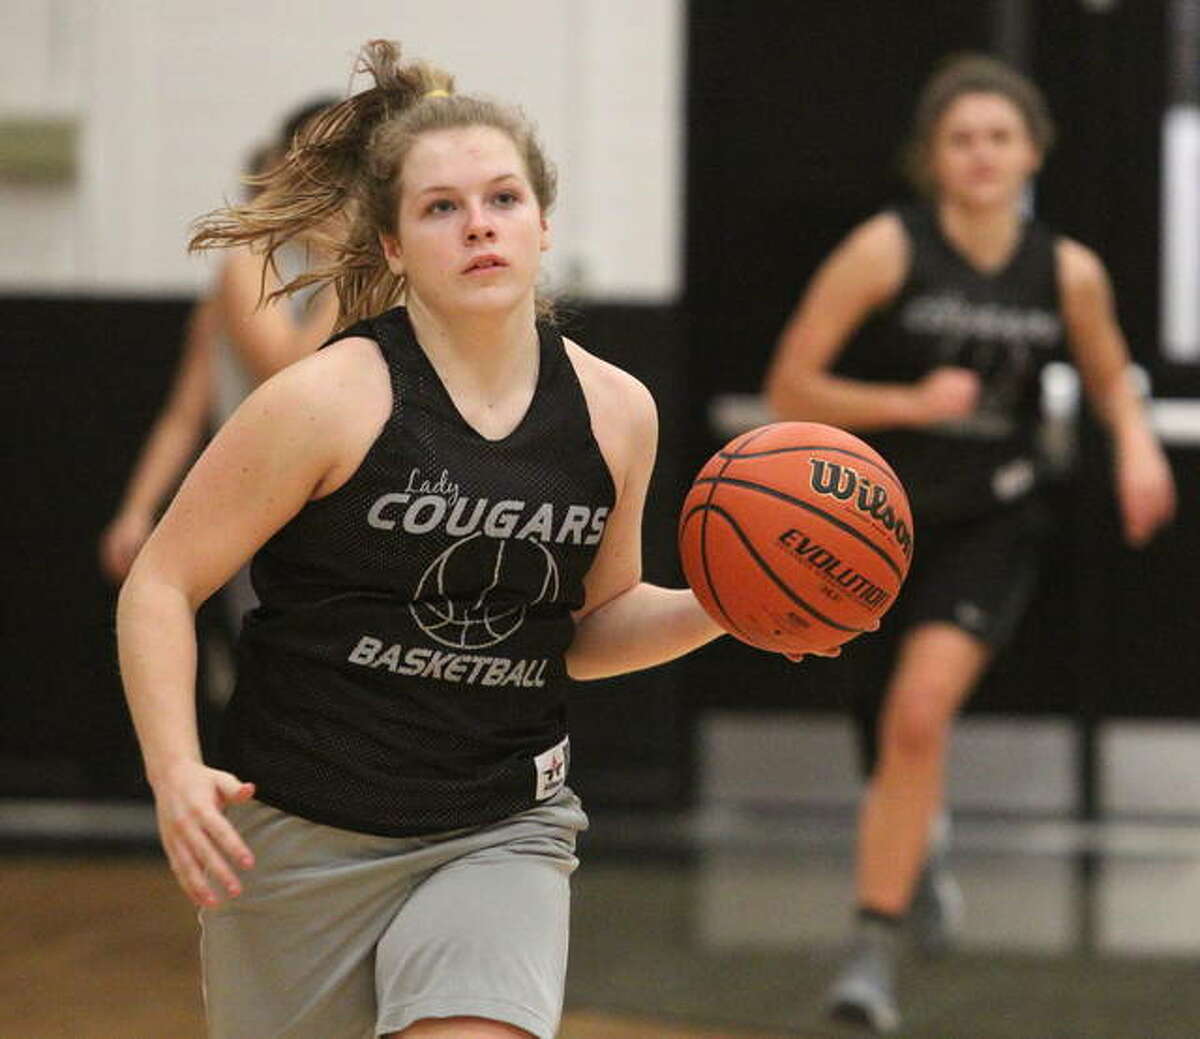 West Central’s Zaylei Evans drives to the basket during a recent practice in Bluffs. Evans, a freshman, will be the Cougars’ point guard this season.